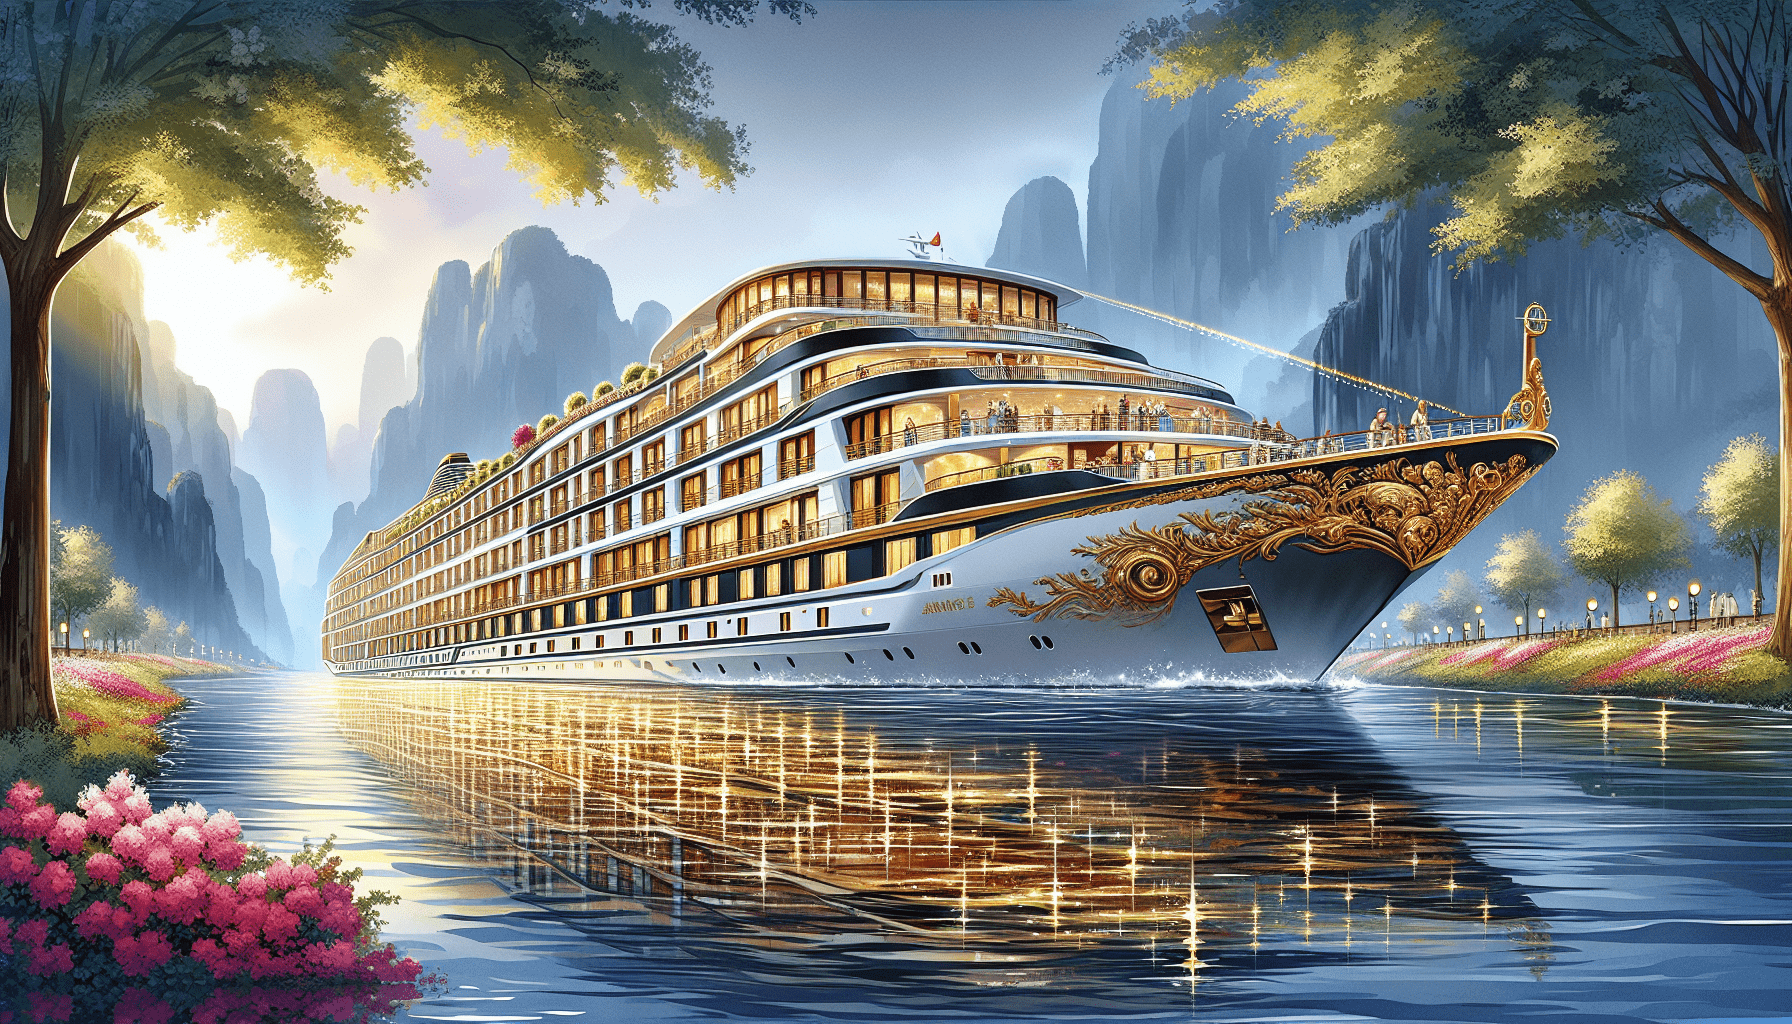 Which Is The Largest River Cruise Ship In The World?